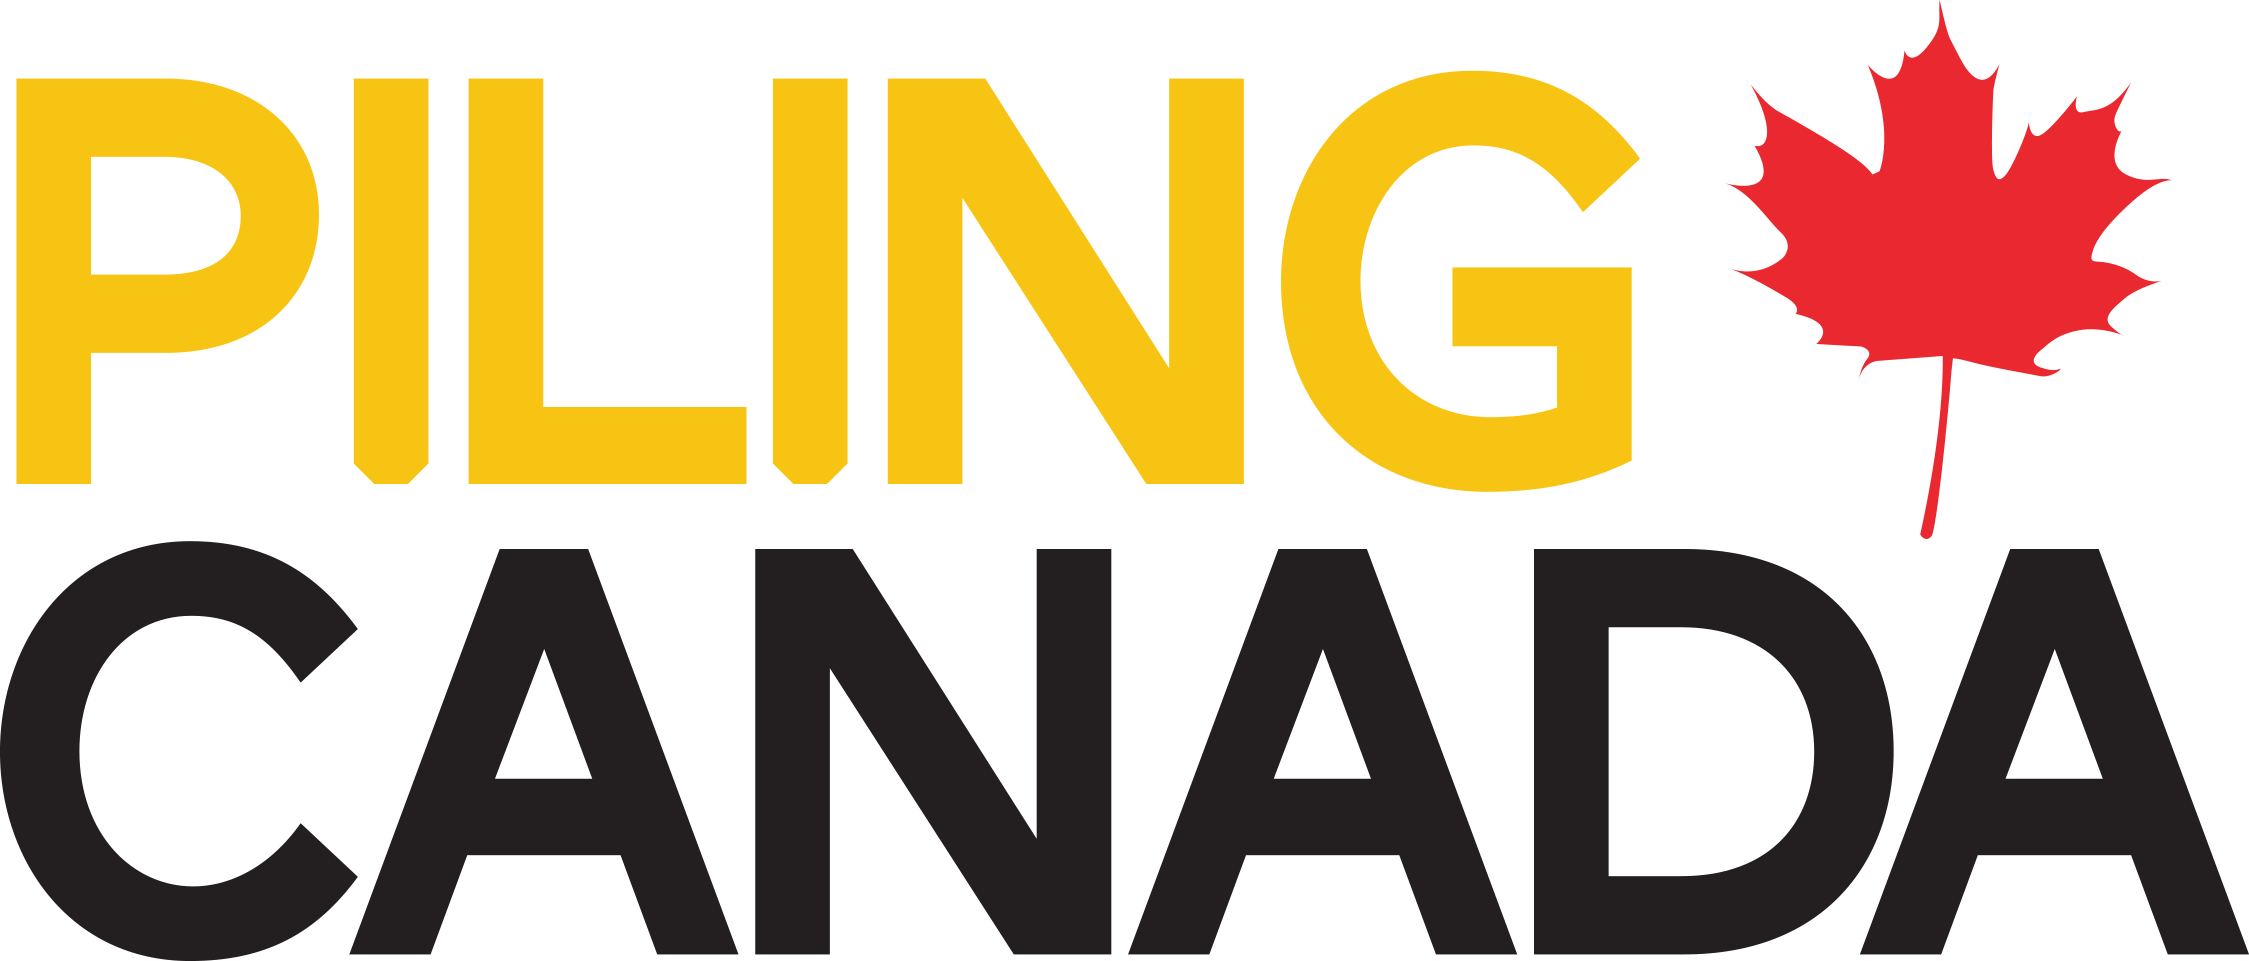 logo for piling canada